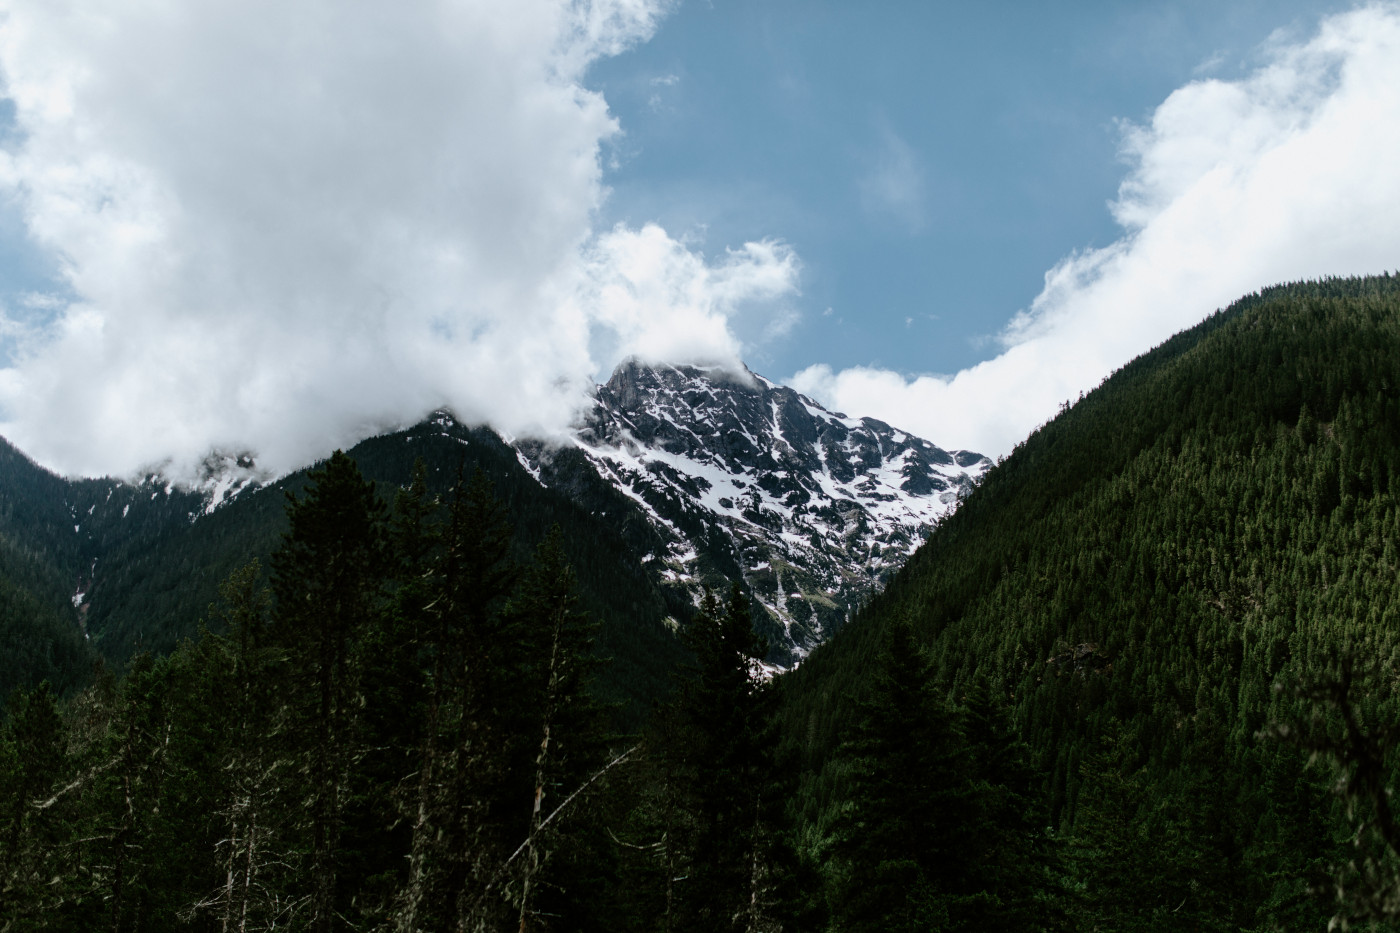 Elizabeth and Alex hike to their picnic spot. Elopement photography at North Cascades National Park by Sienna Plus Josh.